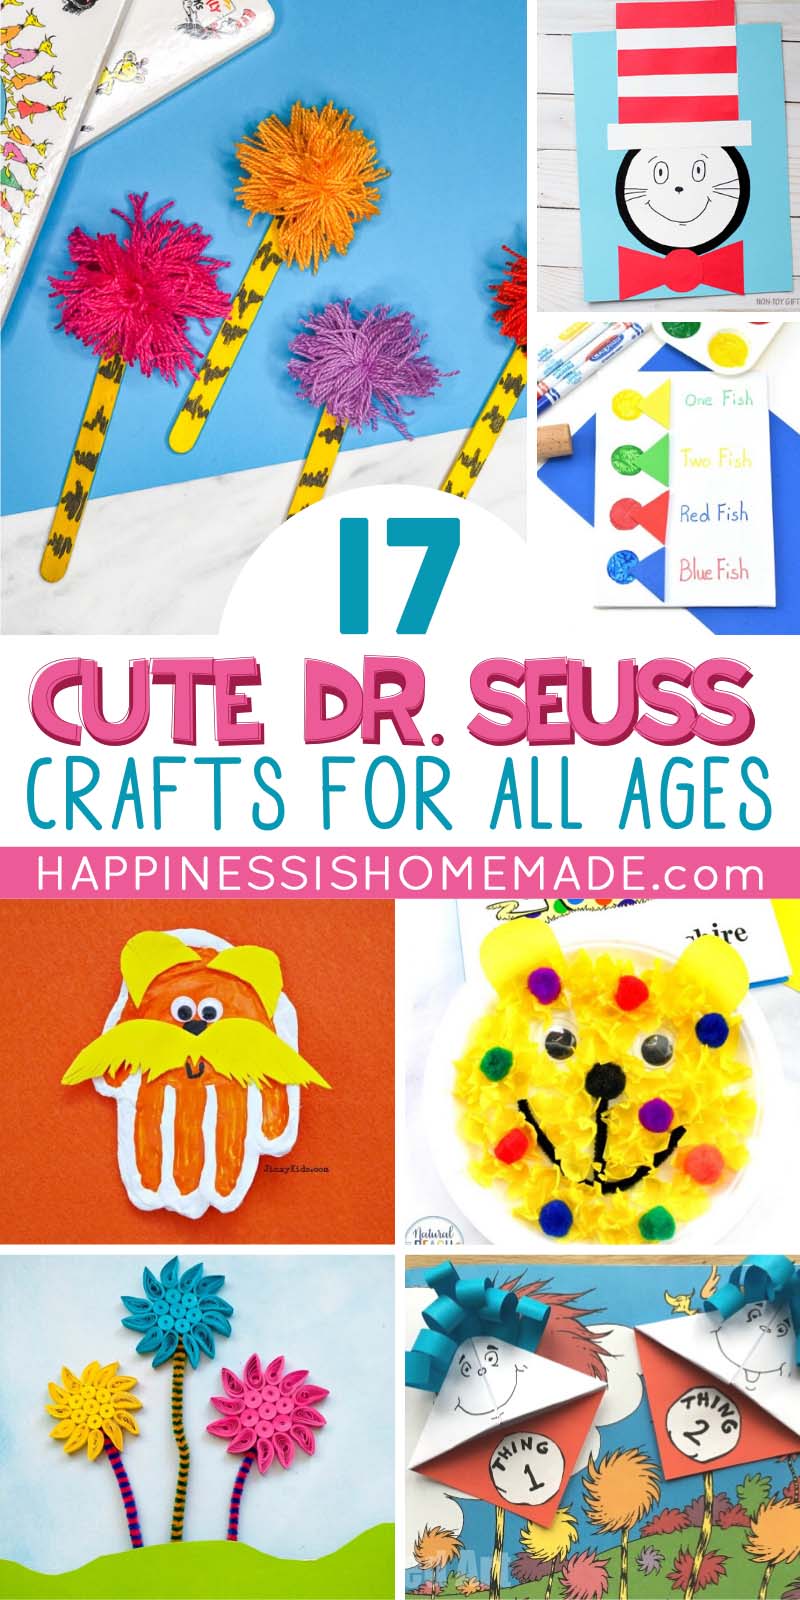 9 Story Inspired Kids Crafts for Creative Storytelling - Glue